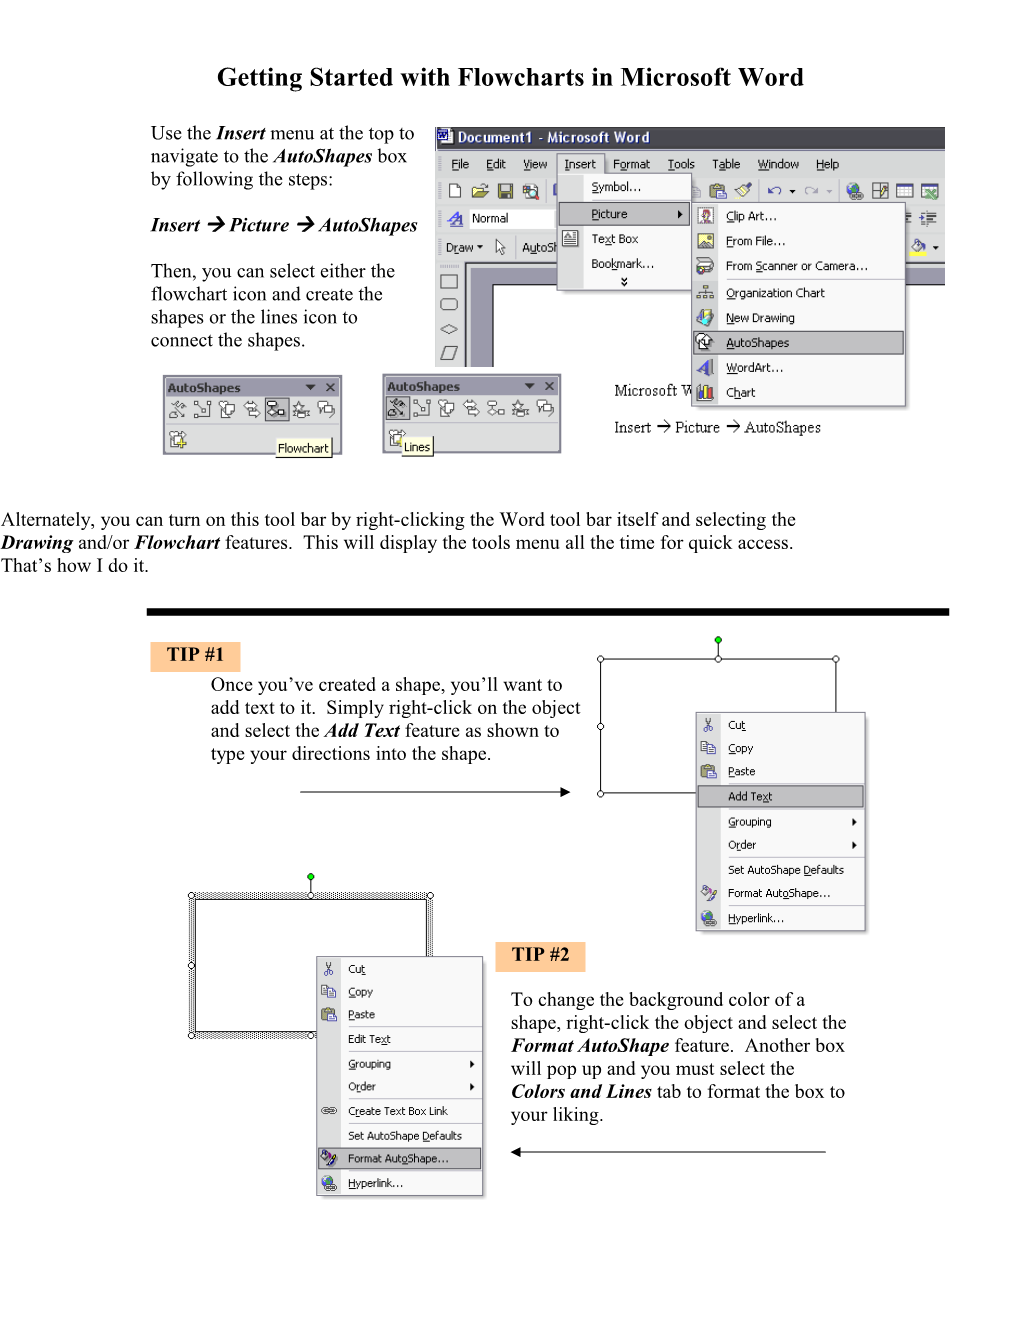 Microsoft Word Flowchart Guidelines and Suggestions